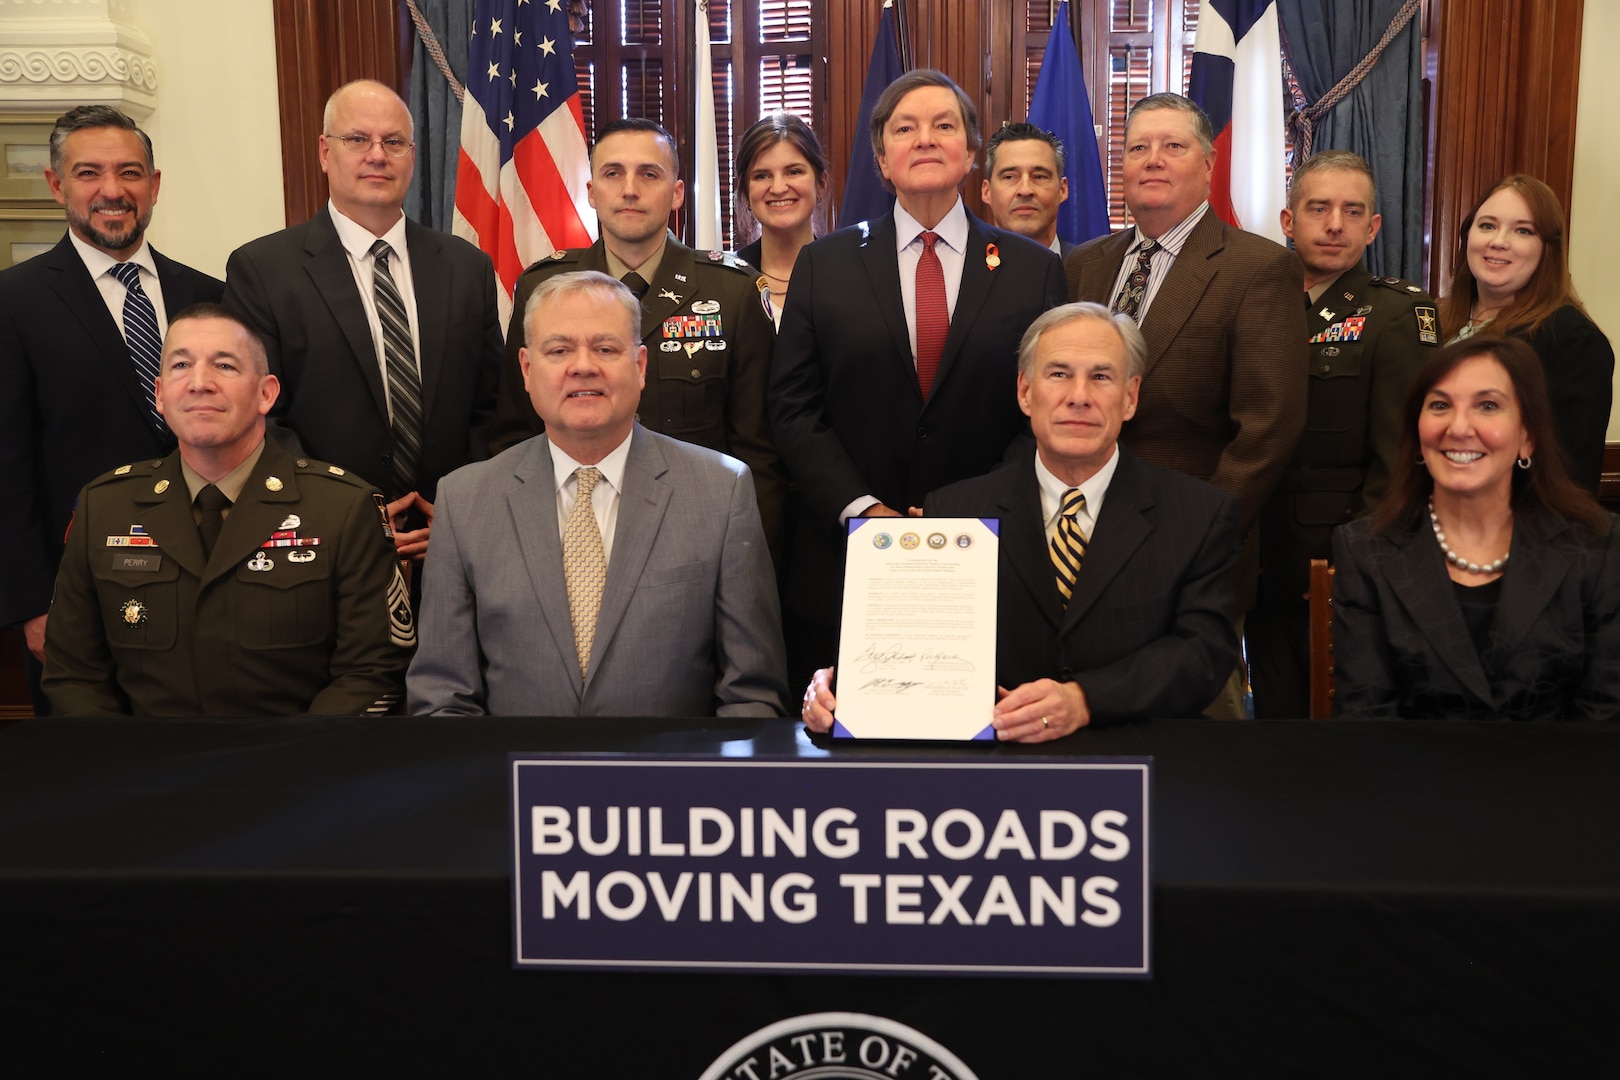 Historic statewide Intergovernmental Support Agreement signed